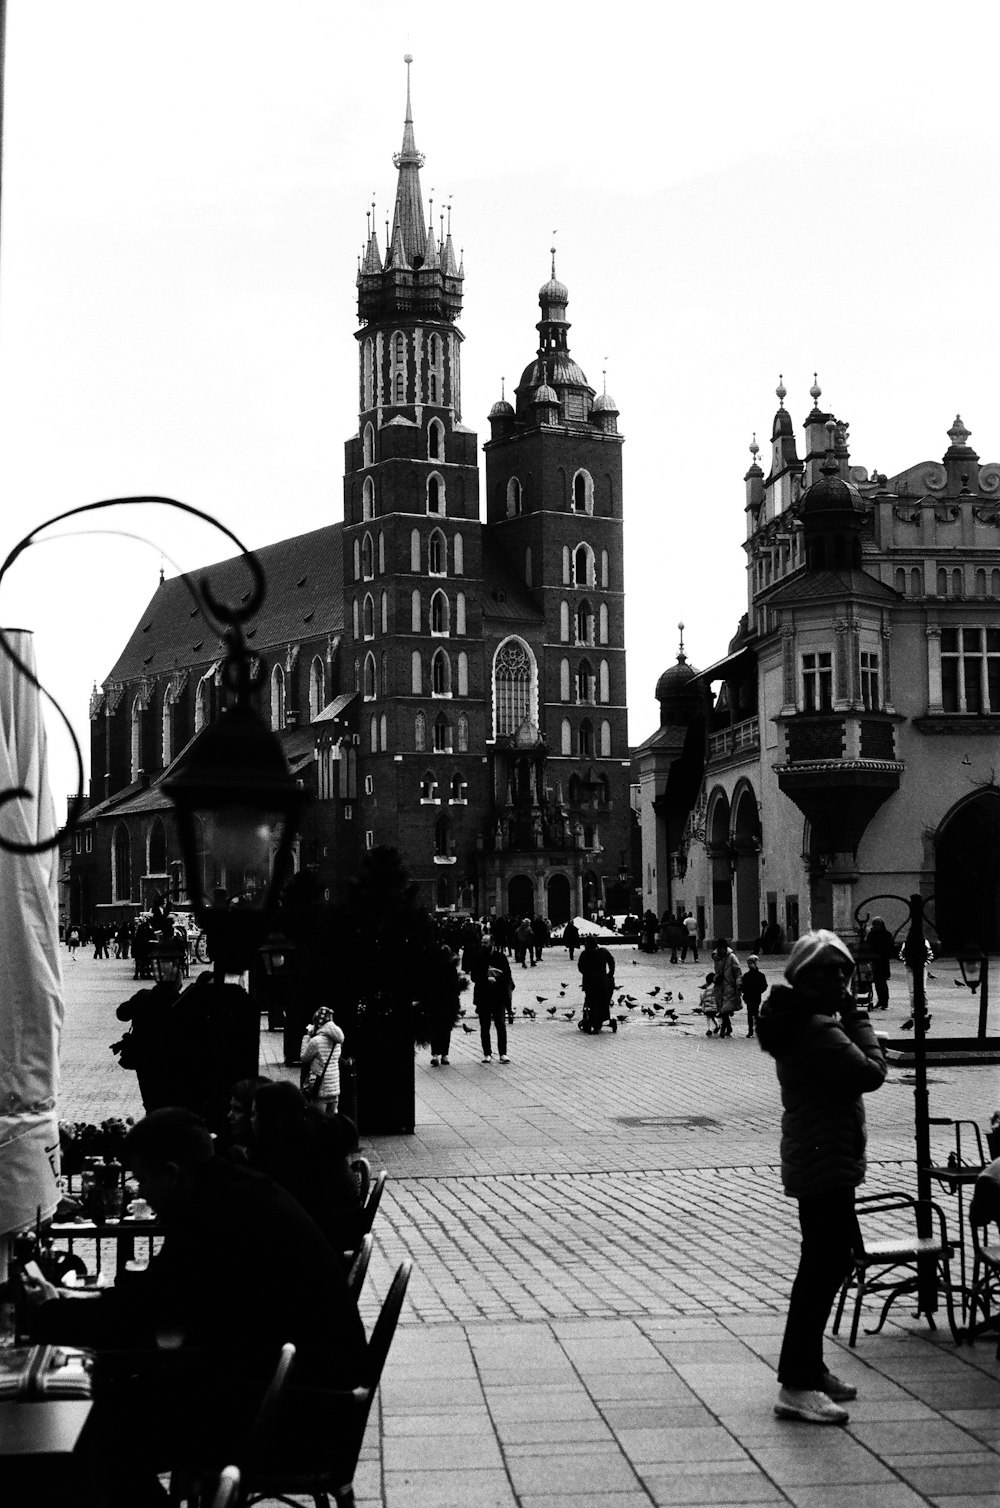 a black and white photo of a town square